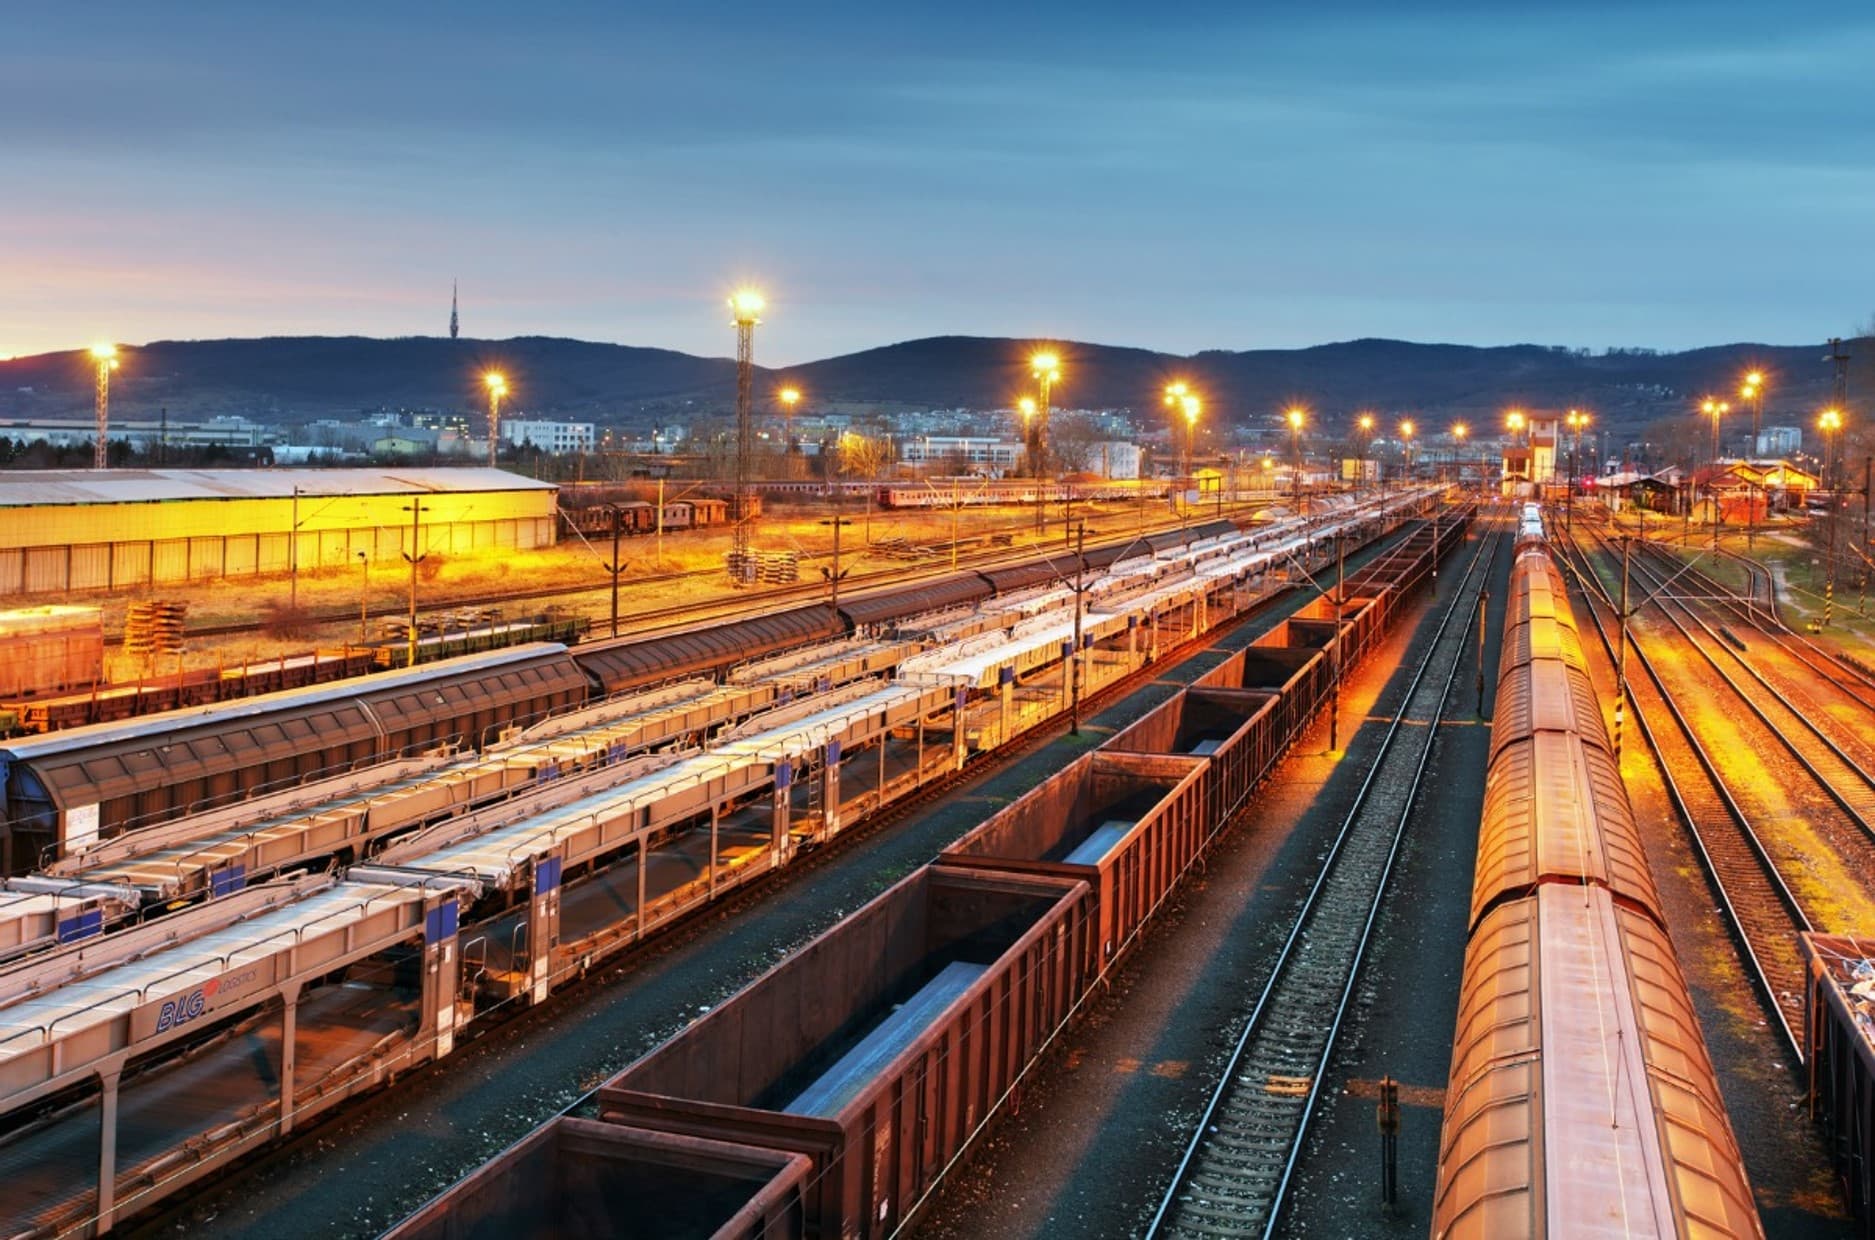 The logistical challenge of transporting long rails - voestalpine